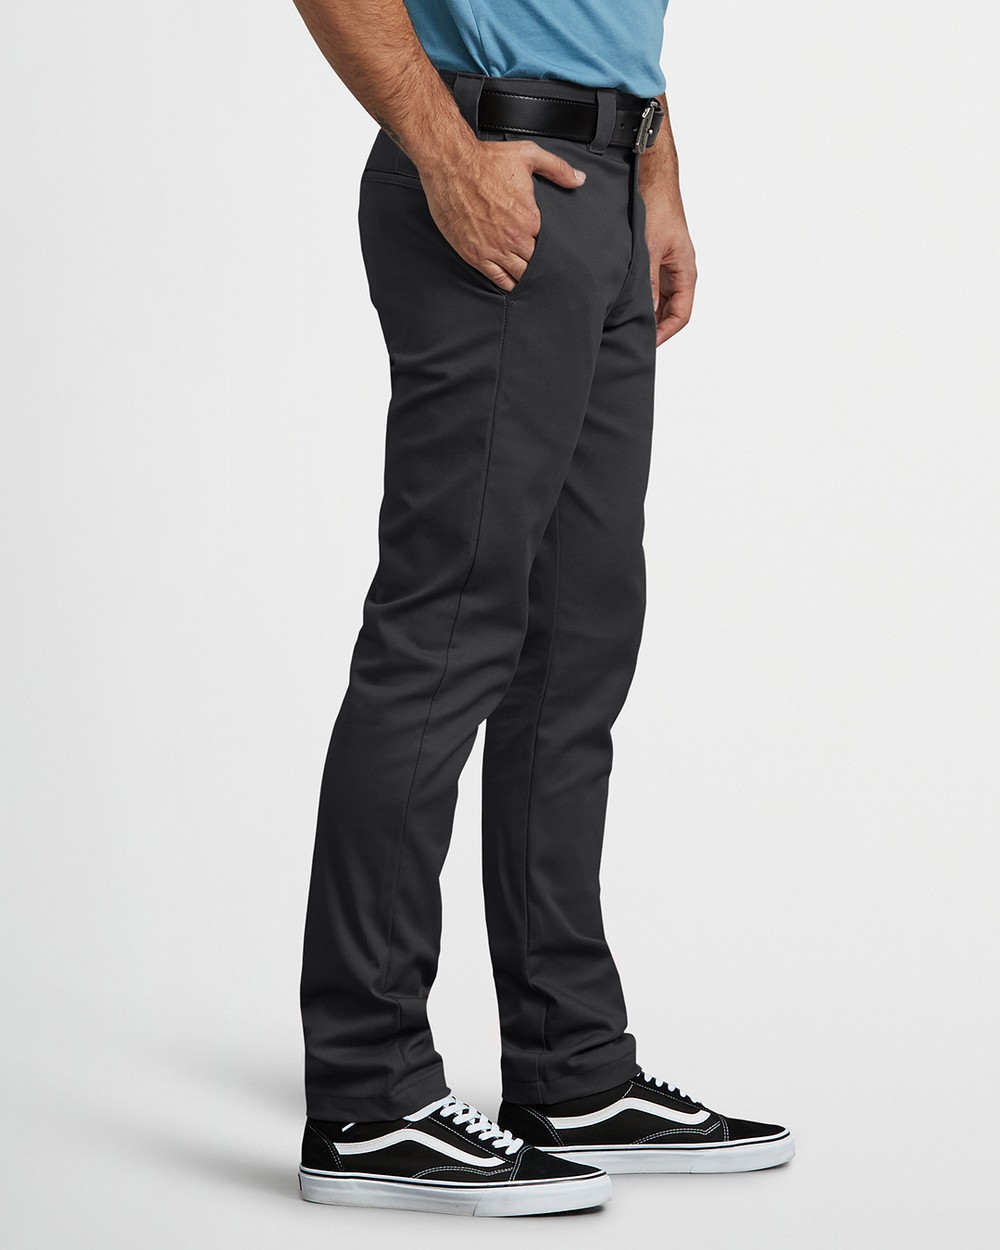 The 25 Best Work Pants For Men Are Built To Last | GearMoose